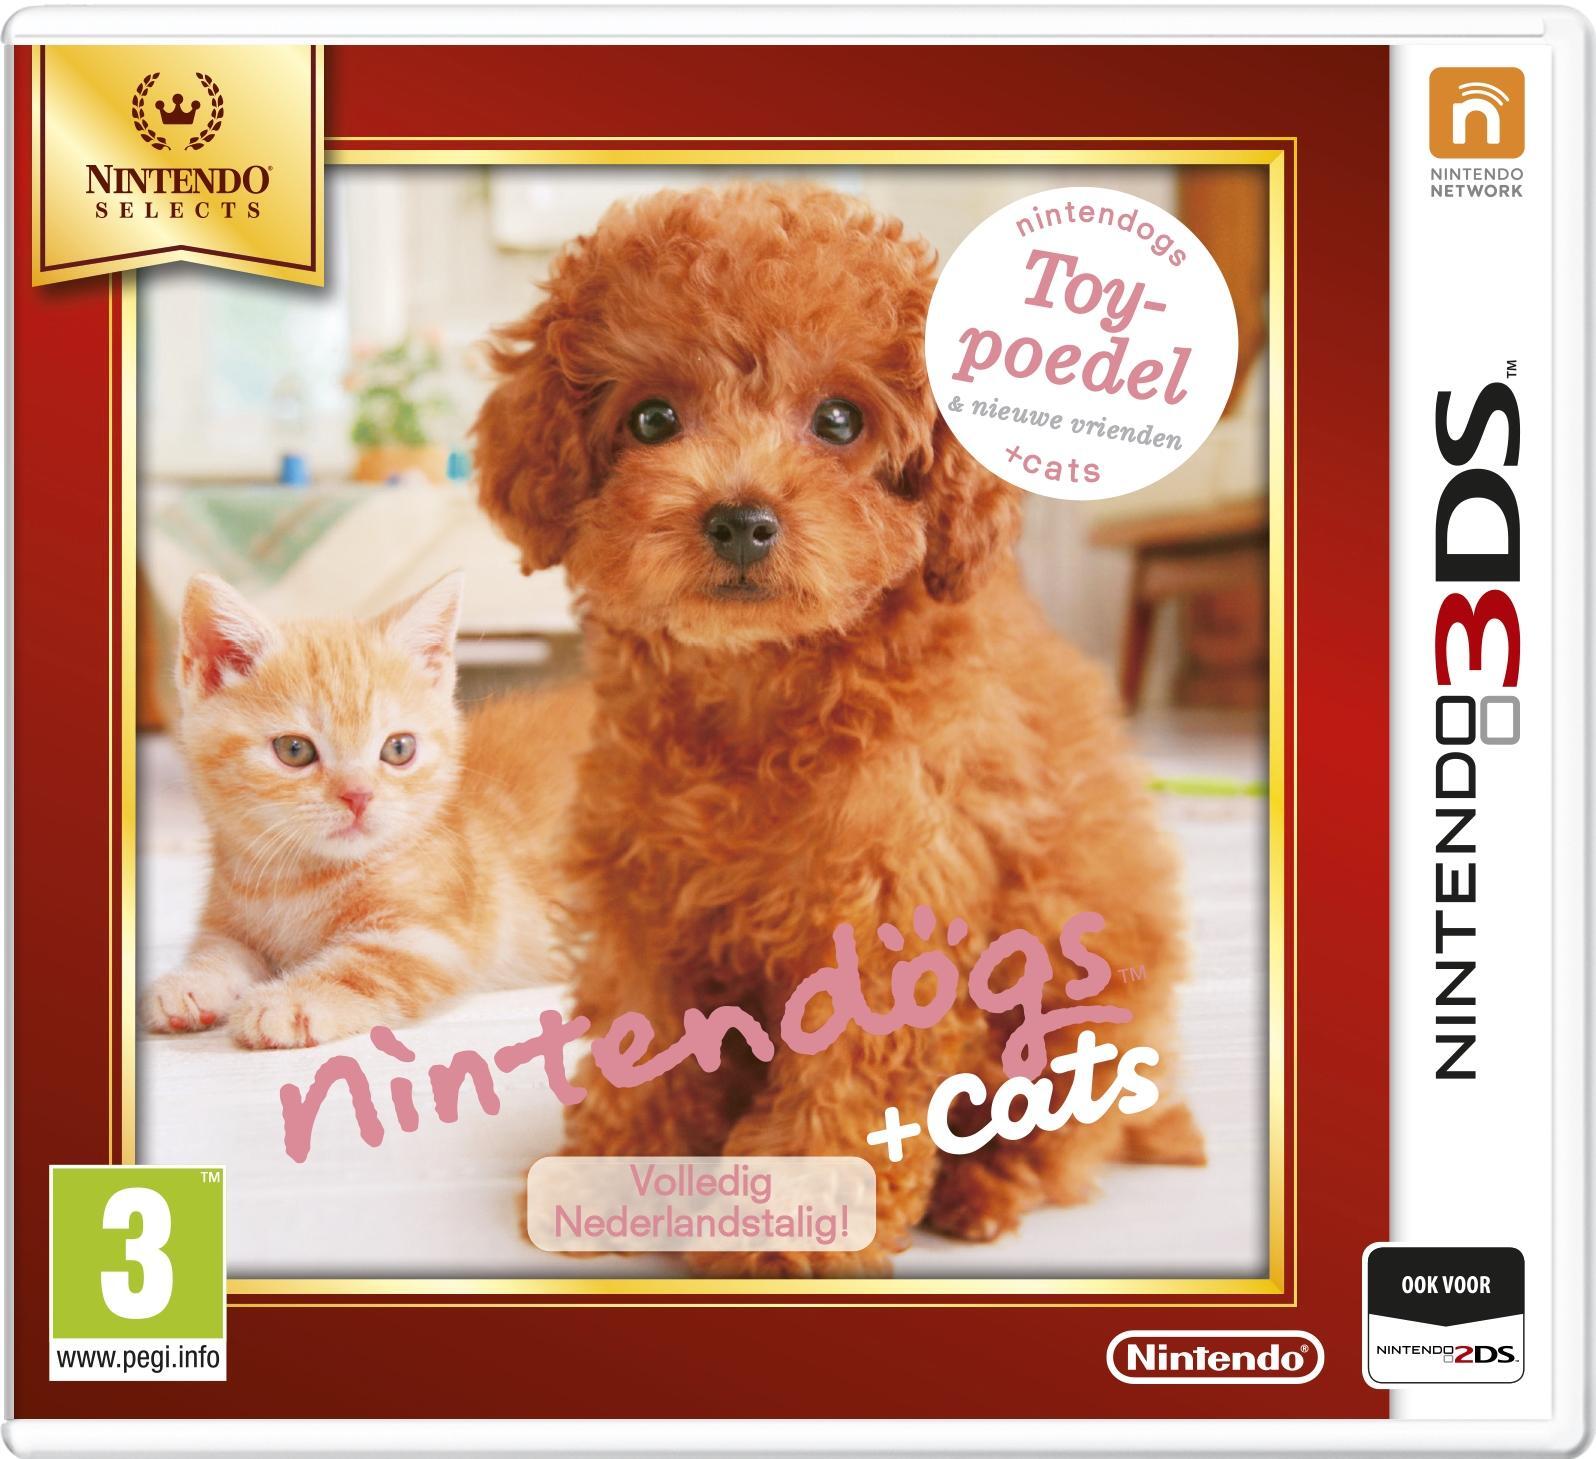 Nintendo Nintendogs + Cats Toy Poodle Selects) Nintendo 3DS